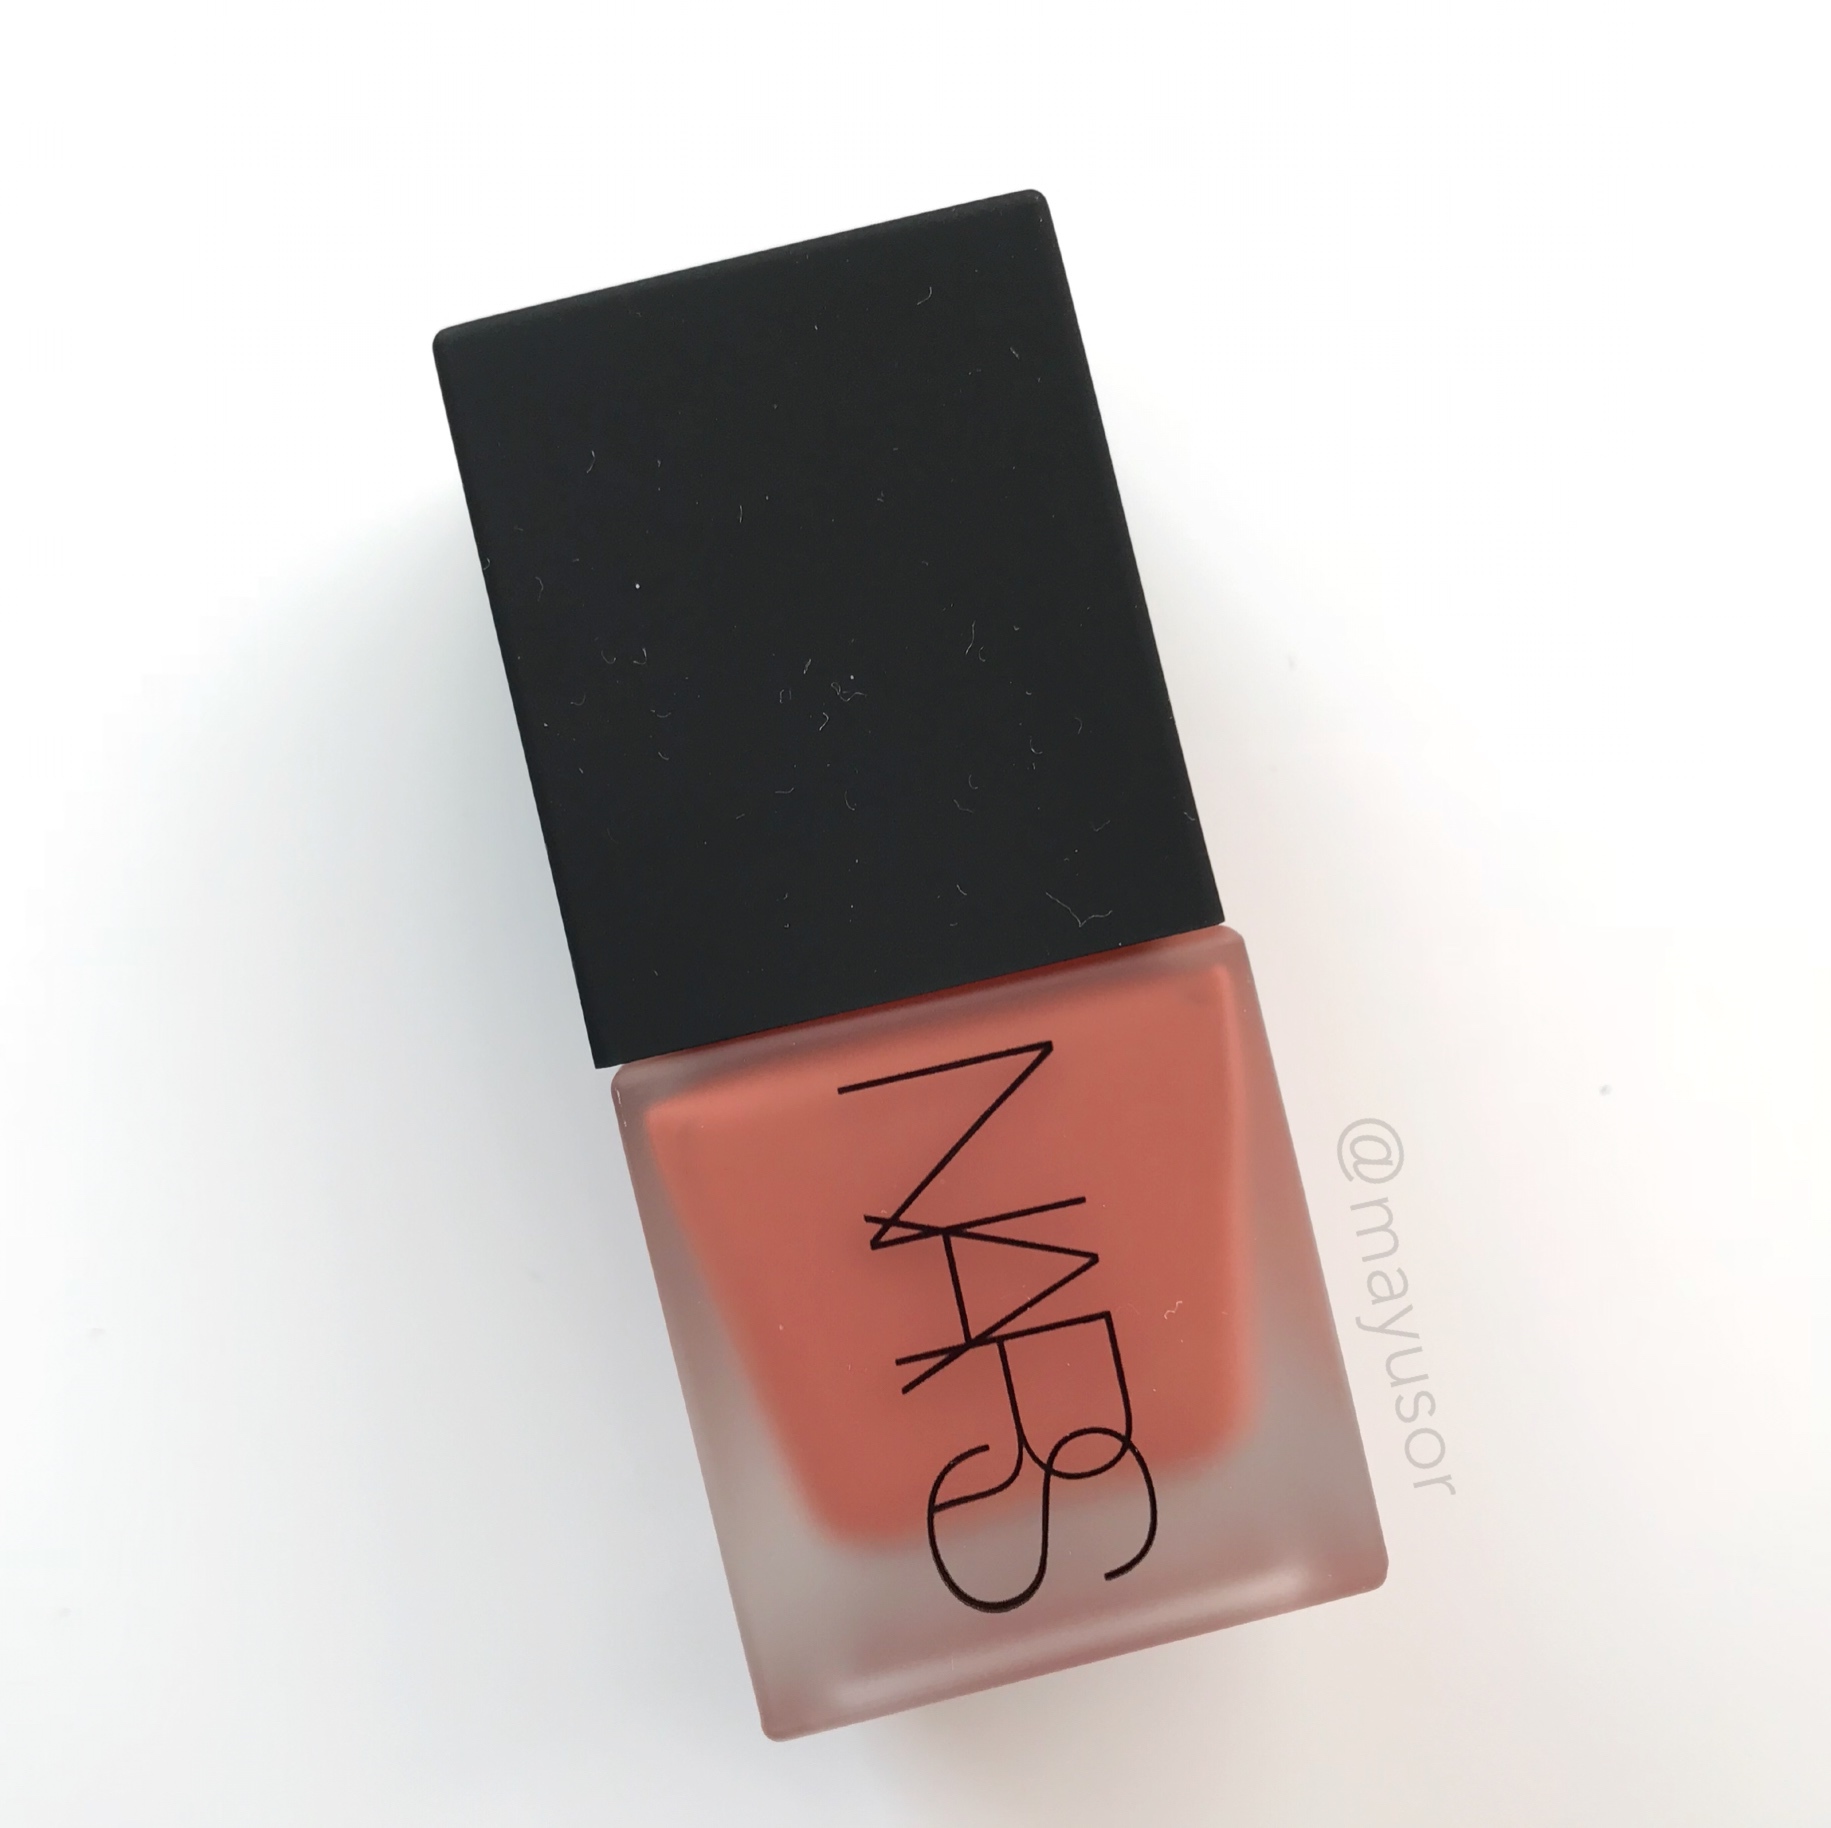 NARS リキッドブラッシュ 5159